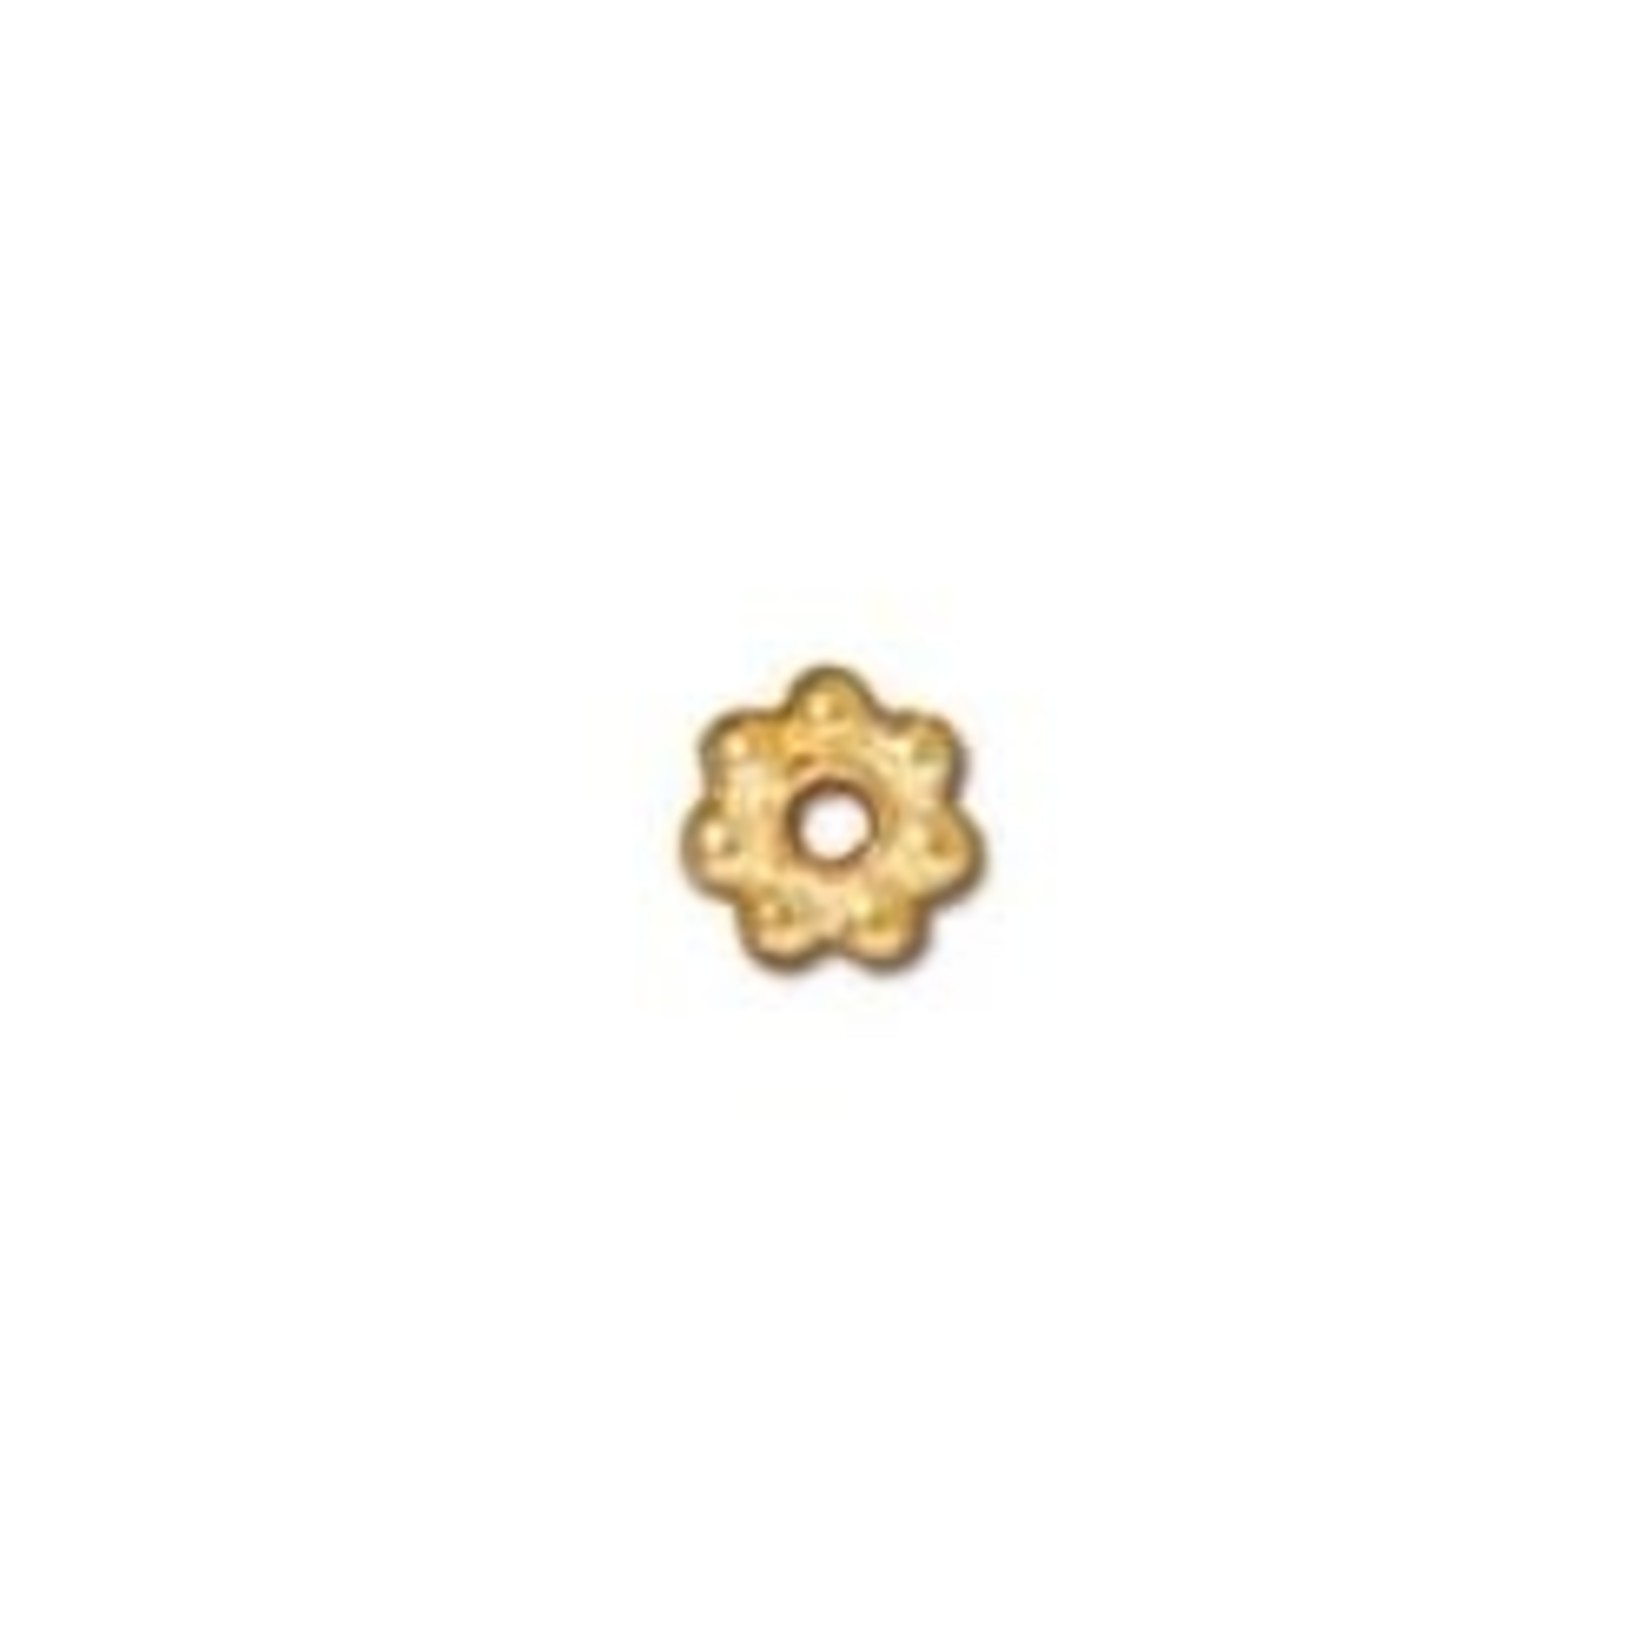 Tierracast Gold Plated 4mm Beaded Daisy Spacer Bead - 50 pieces